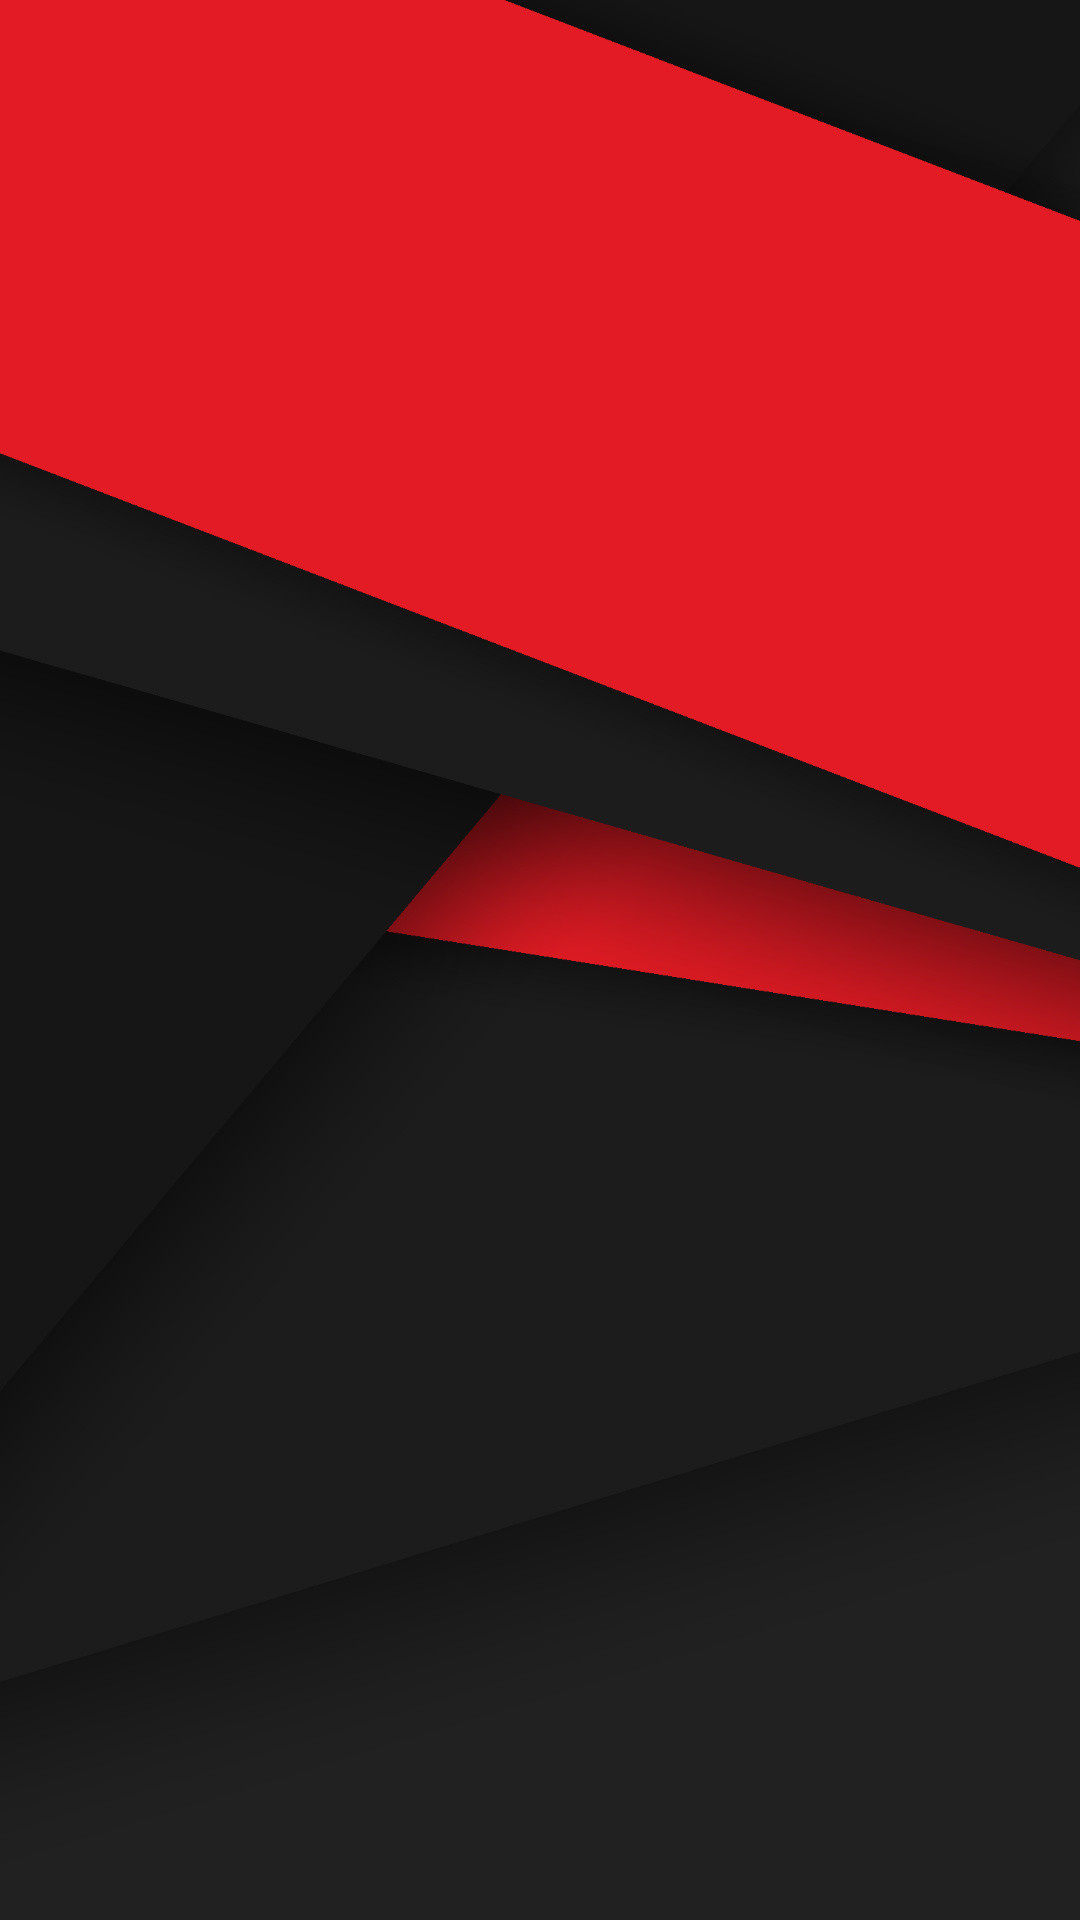 1080x1920, Red And Black Material Design Mobile Hd - Black And Red  Wallpaper 4k For Mobile - 1080x1920 Wallpaper 